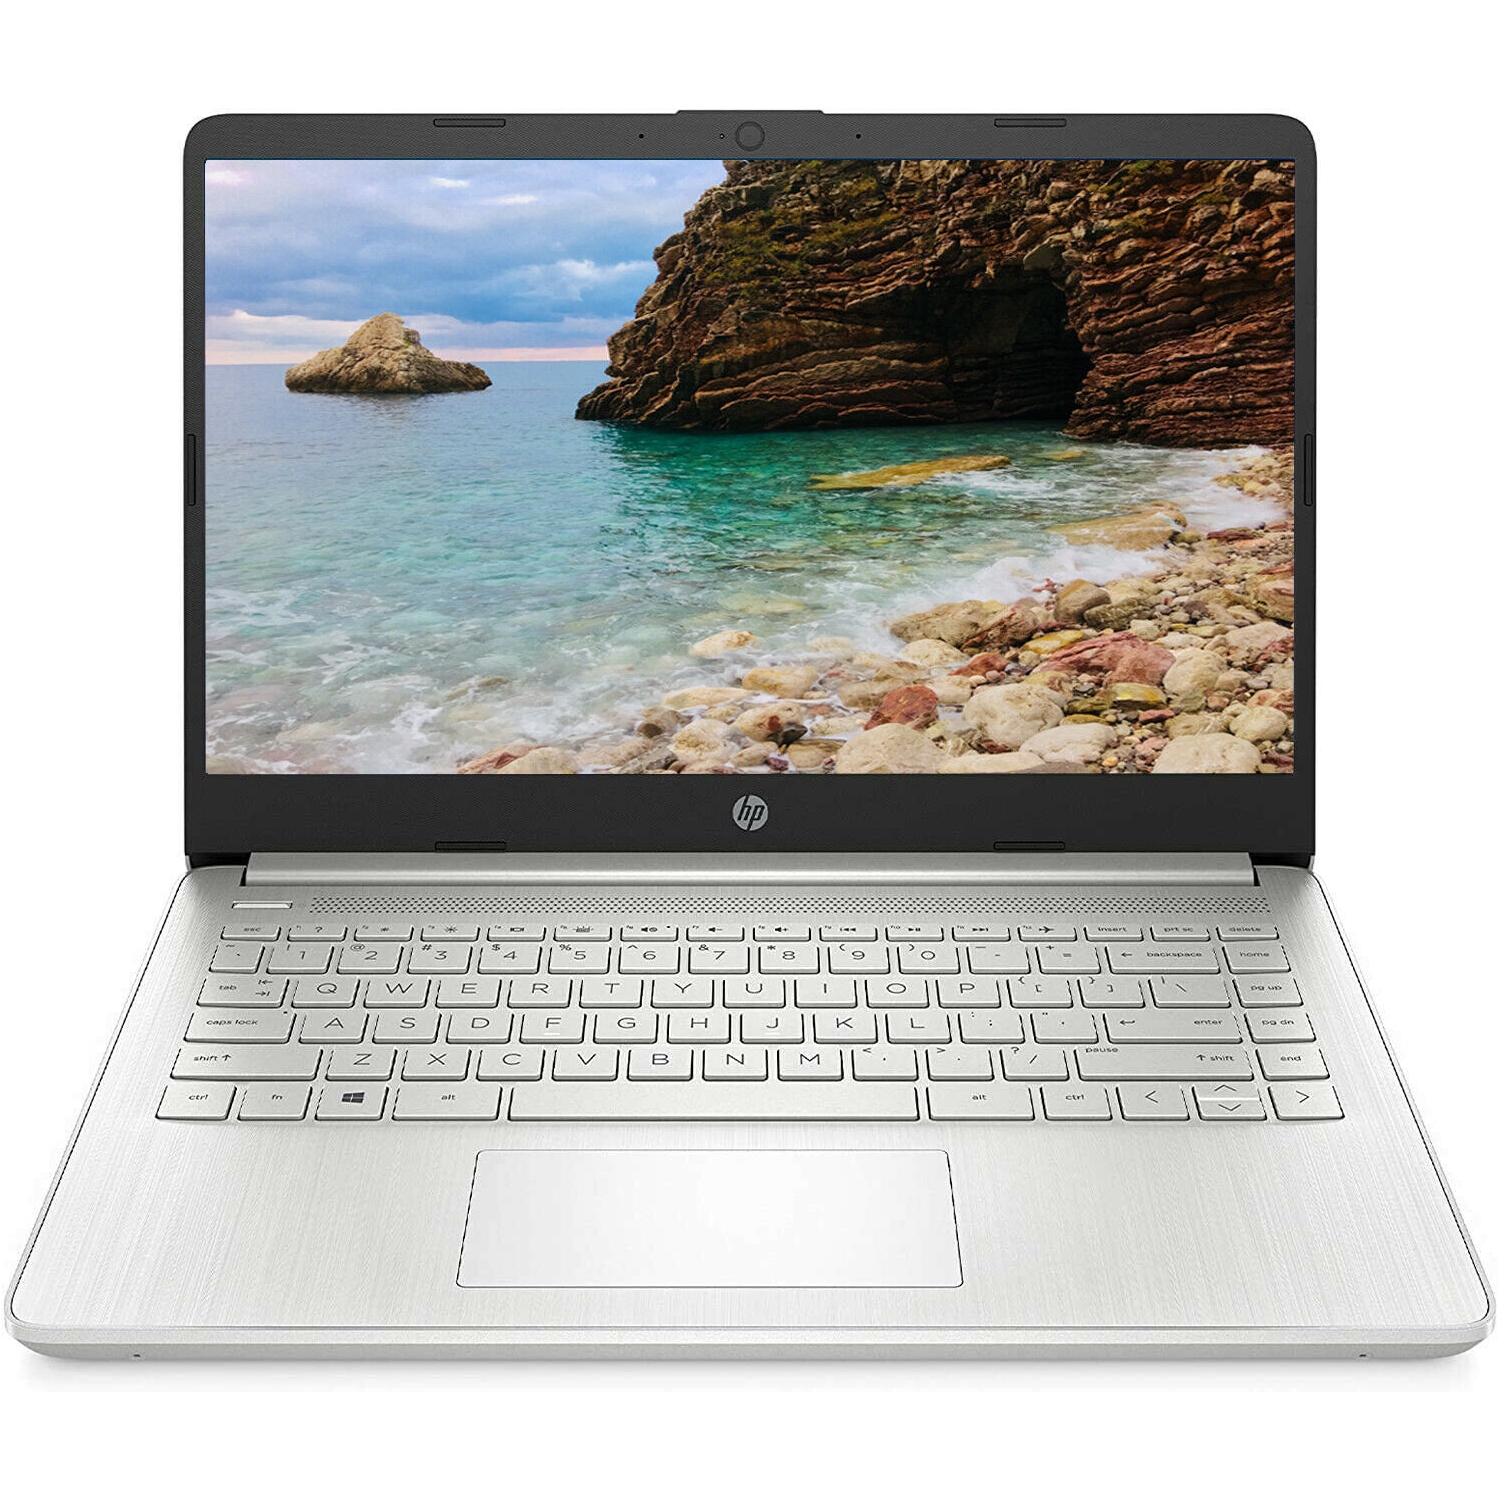 HP 14-dq2055 14 FHD Notebook - Intel Core i3-1115G4 3.0GHz - 4GB RAM 256GB PCIe SSD - Webcam - Windows 10 Home in S Mode - Si